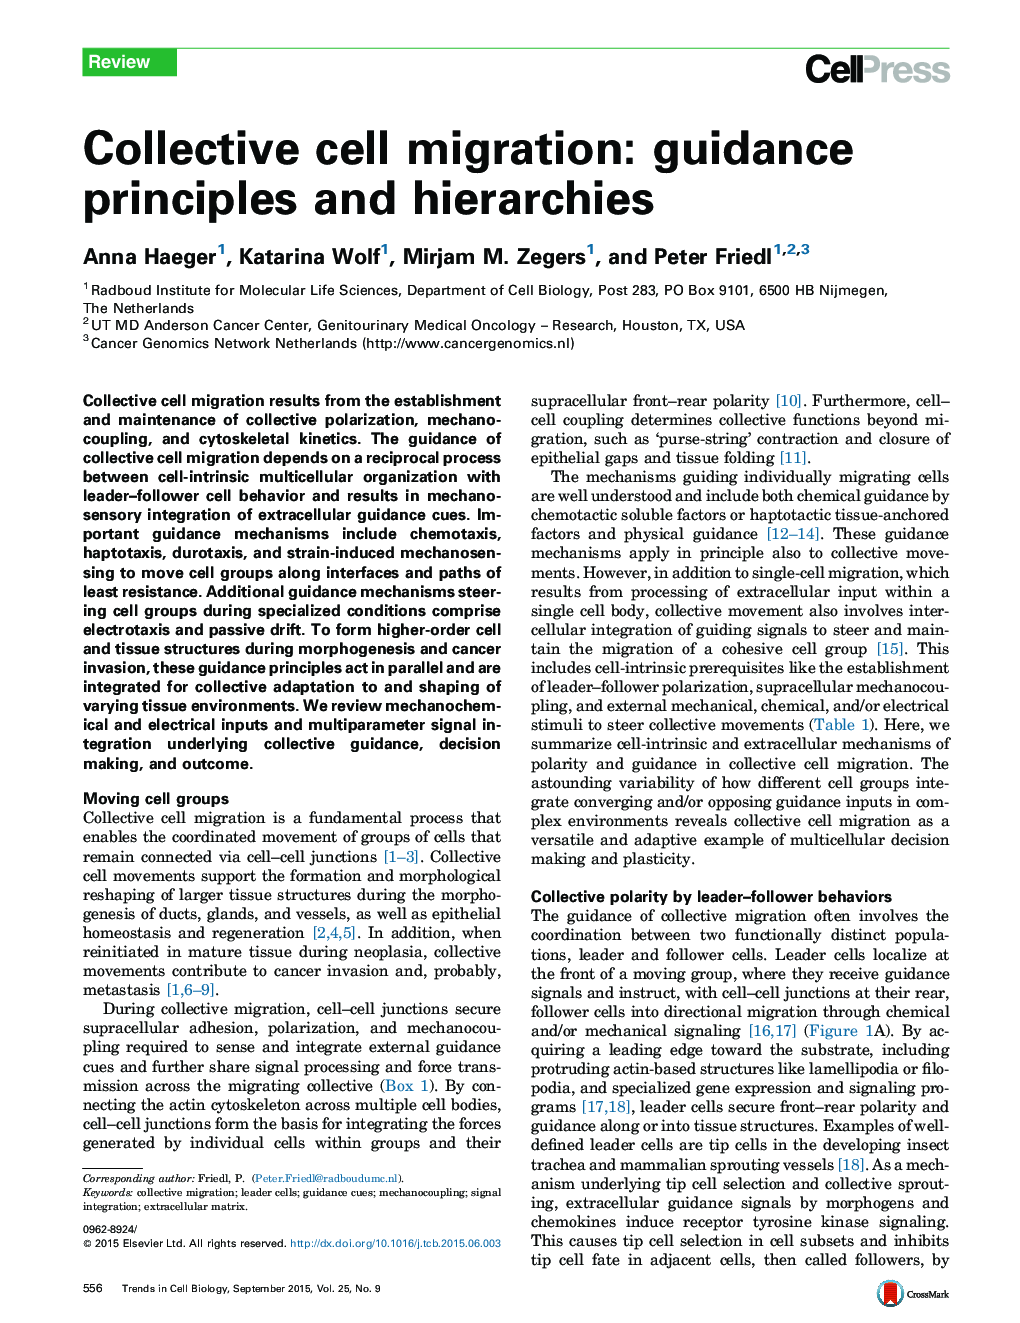 Collective cell migration: guidance principles and hierarchies